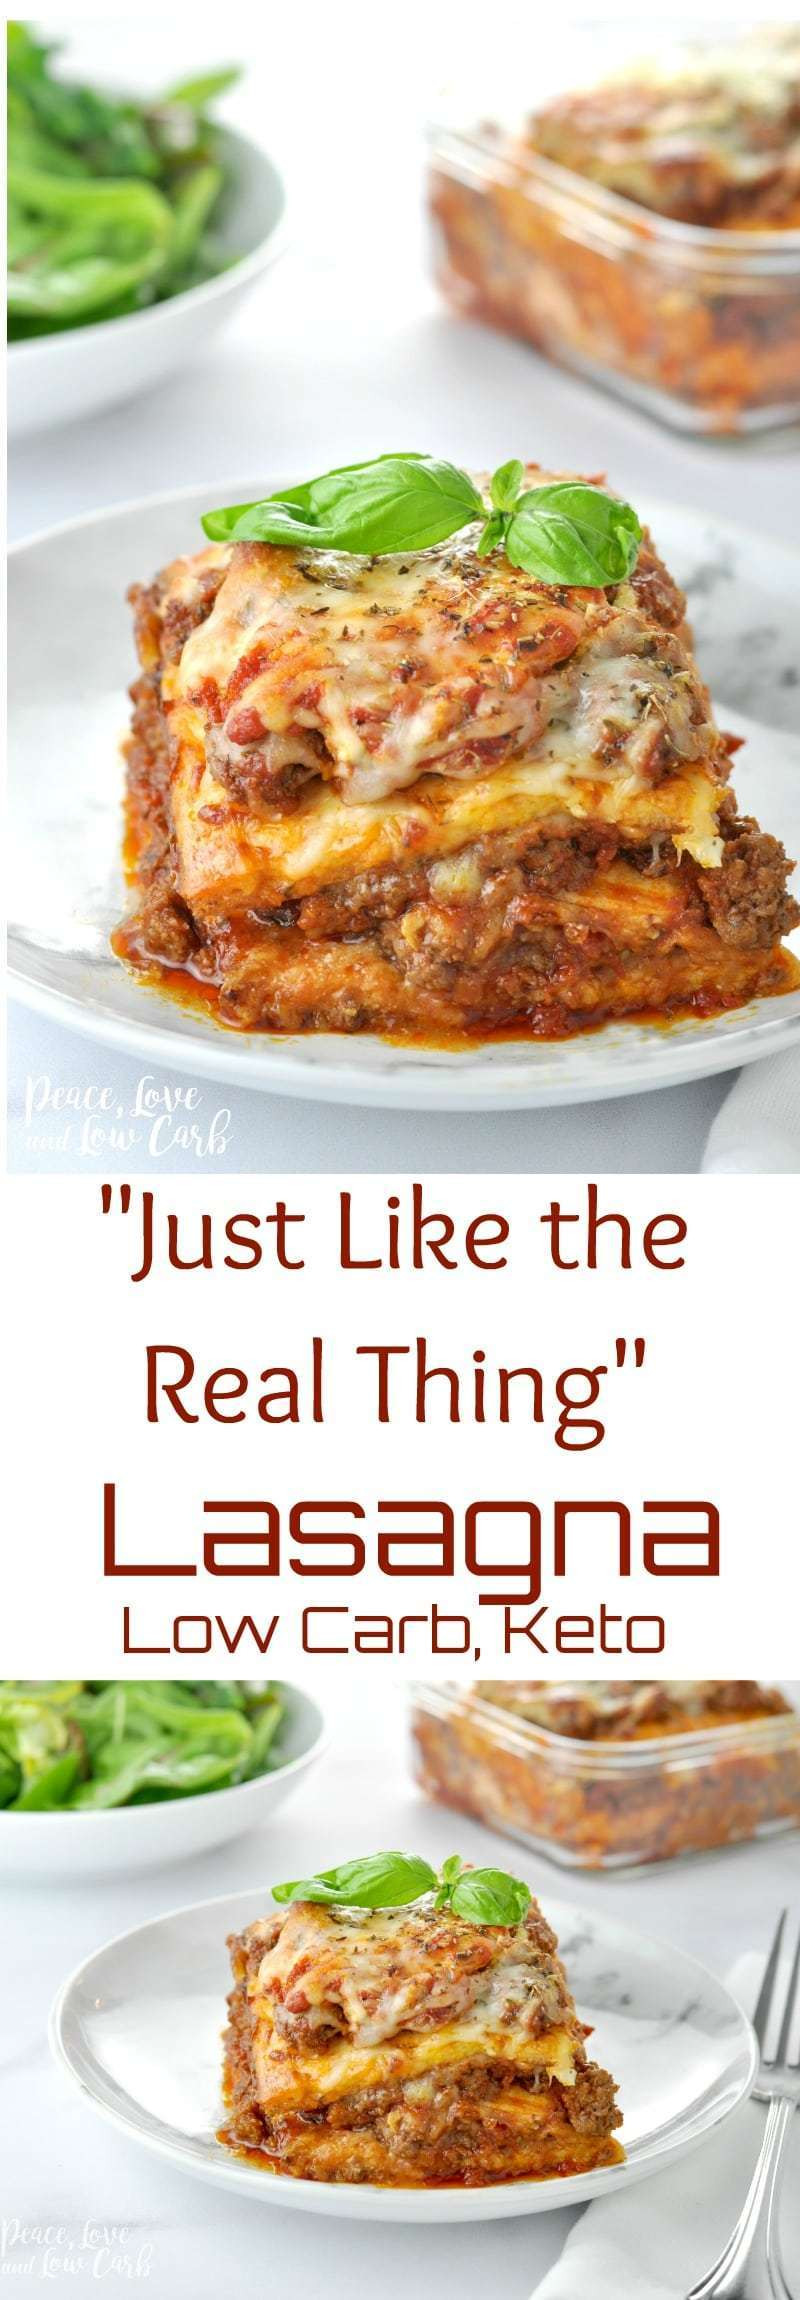 Peace Love And Low Carb Lasagna
 "Just Like the Real Thing" Low Carb Keto Lasagna